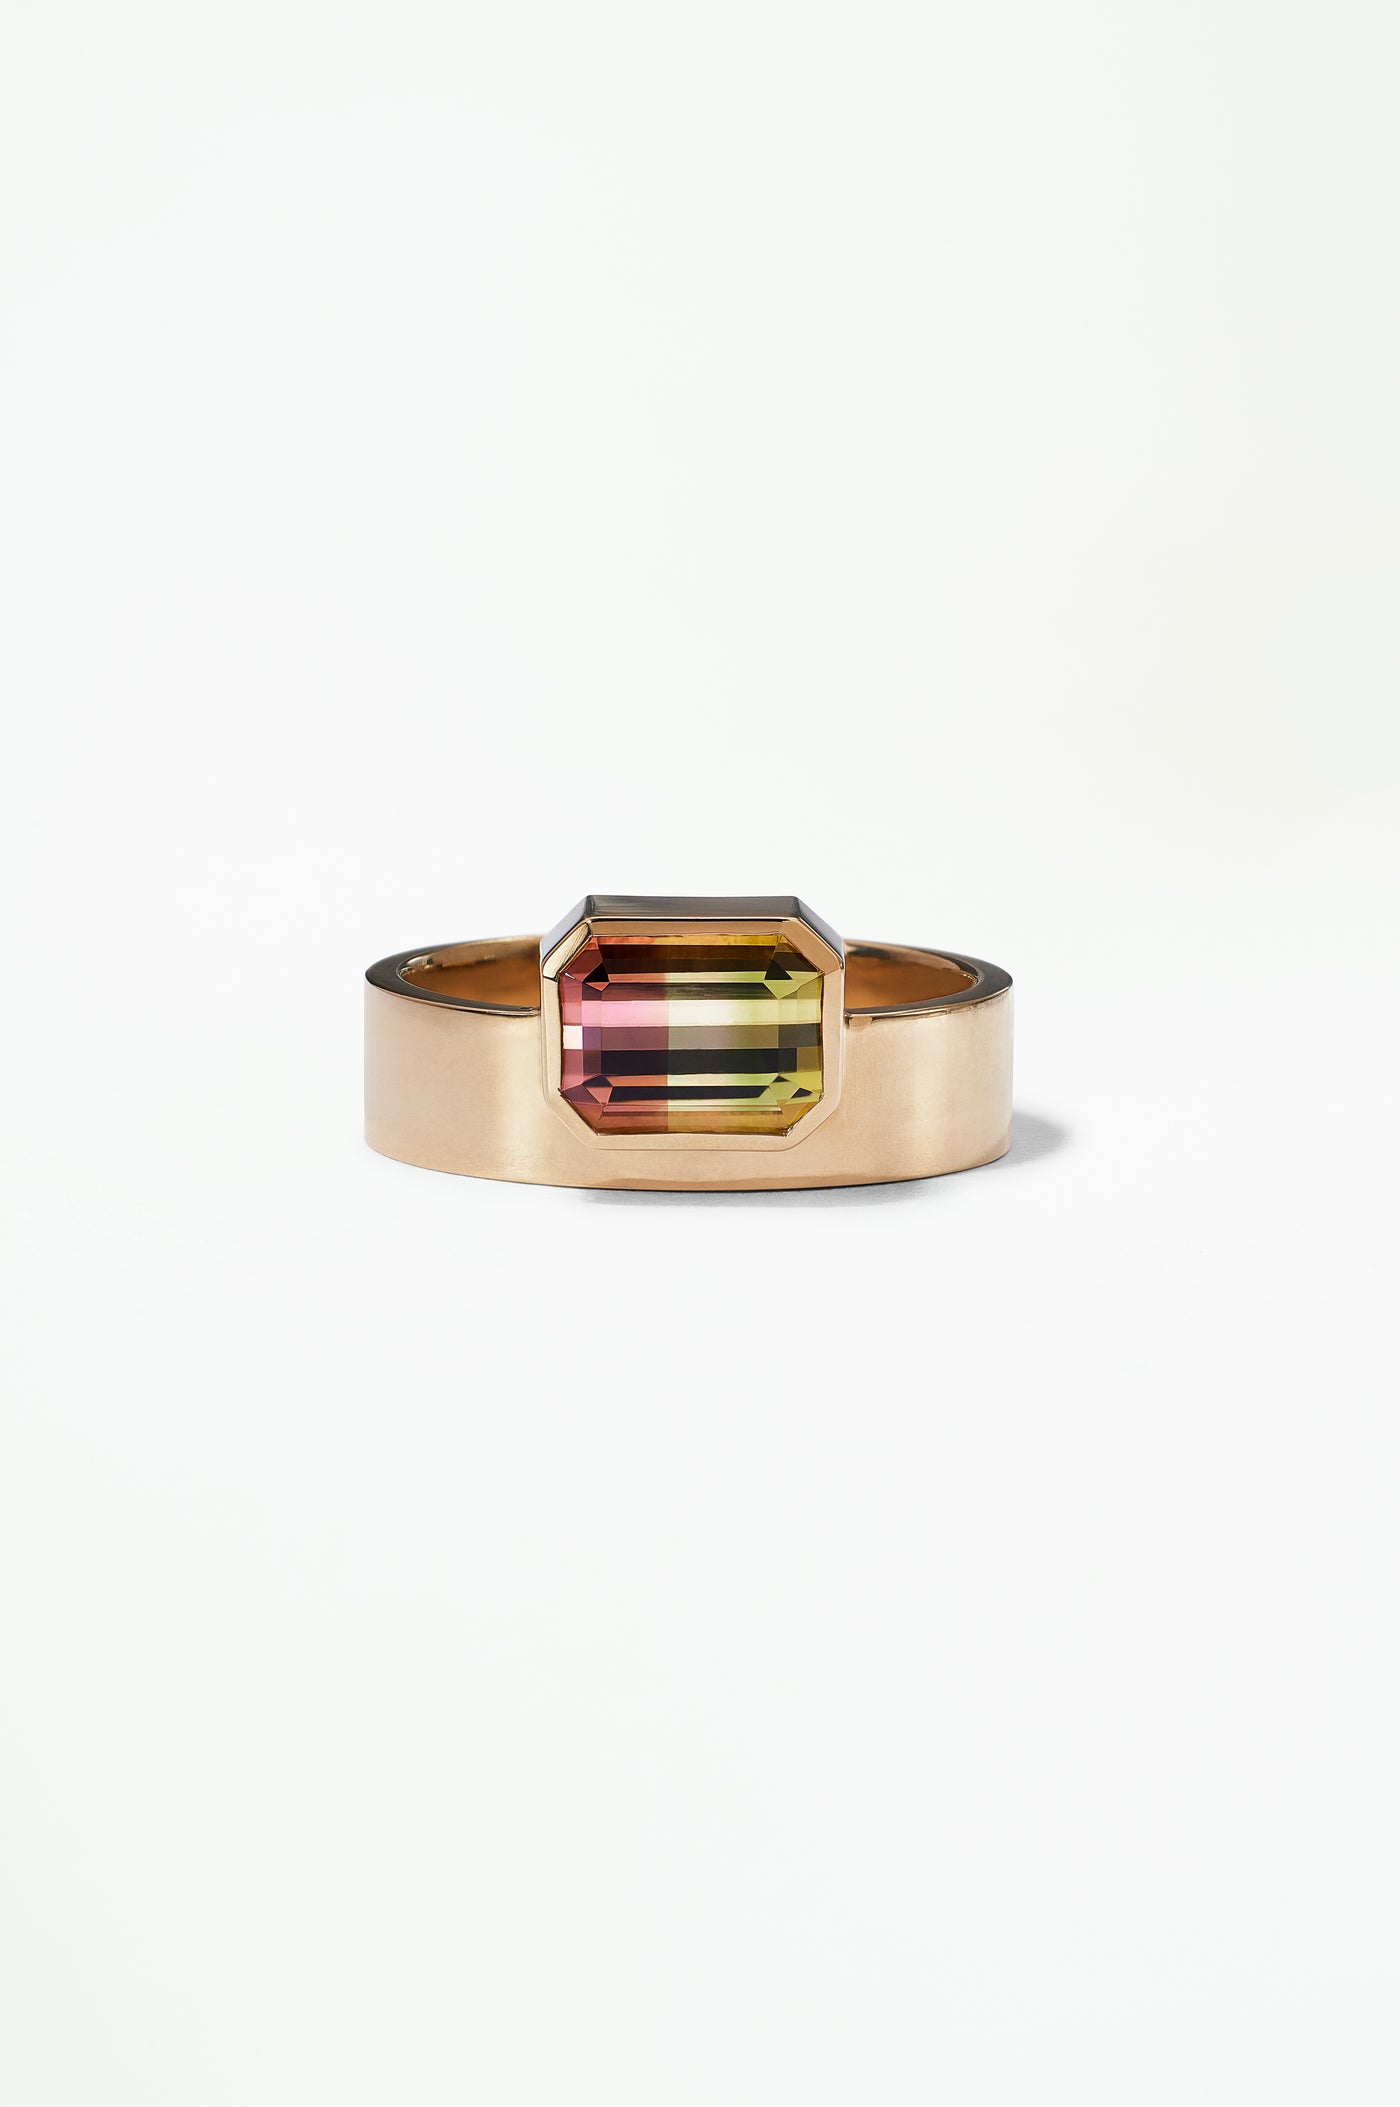 One of a Kind Emerald Cut Tourmaline Monolith Ring No. 14